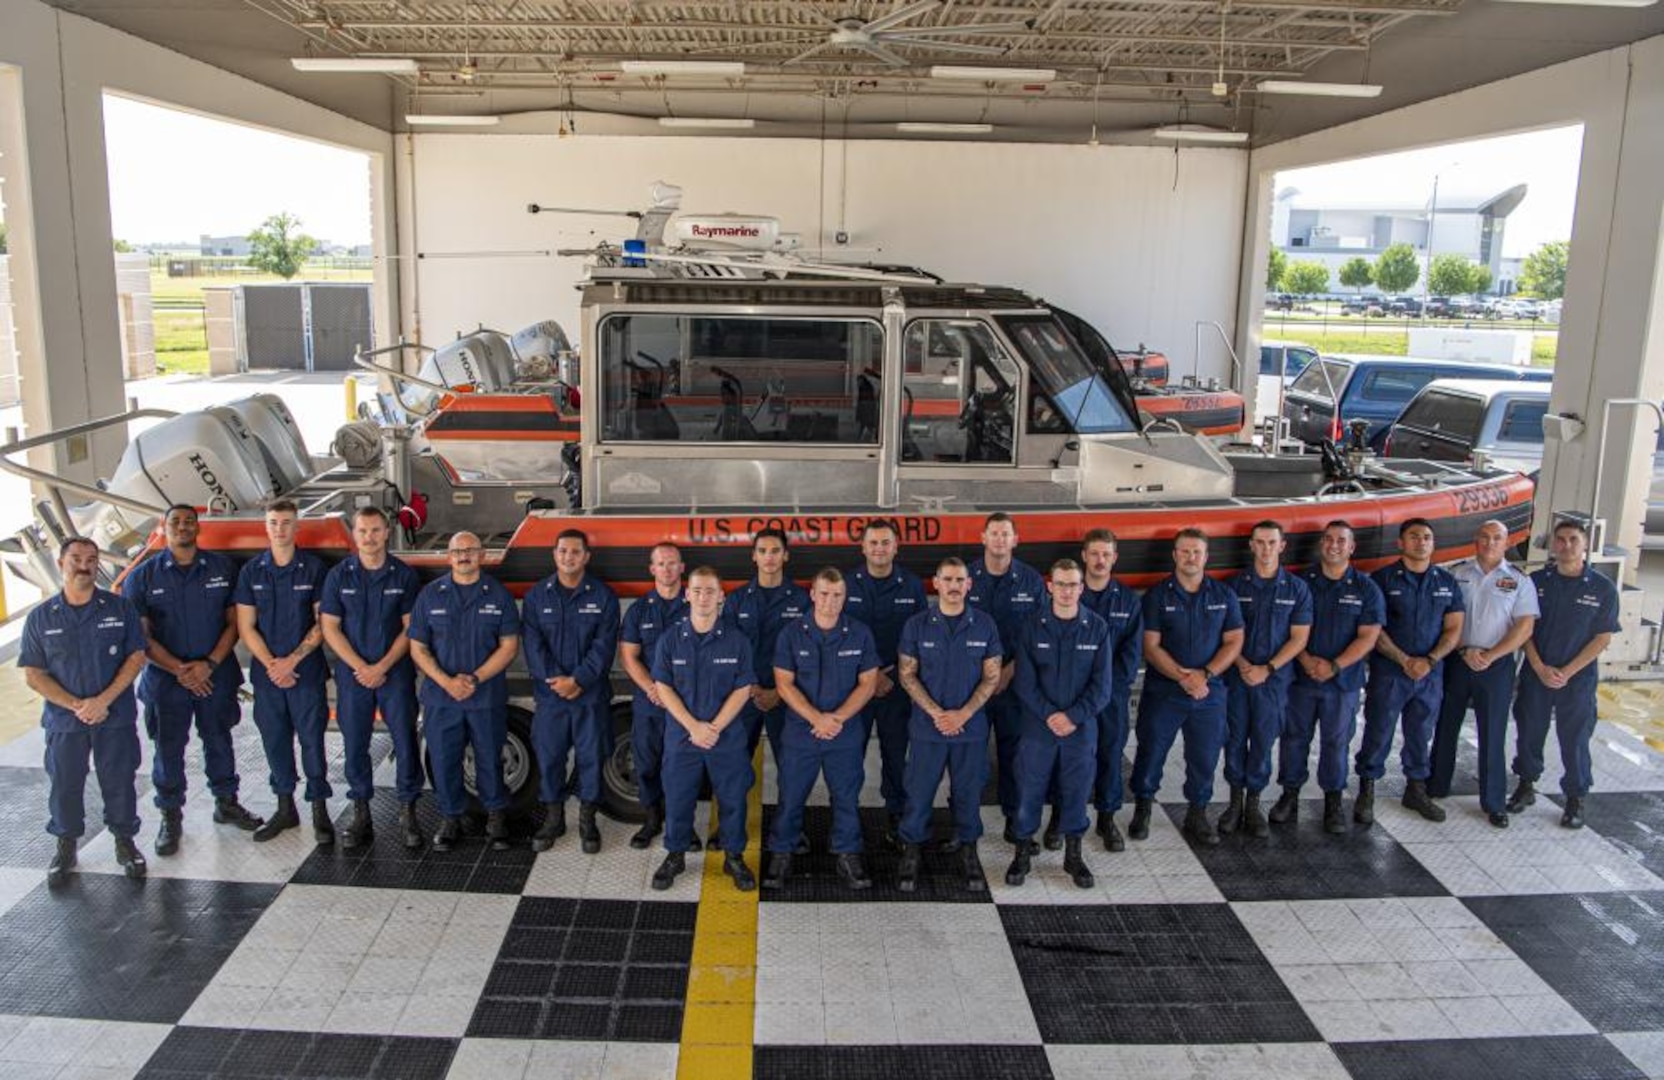 Members from Coast Guard Maritime Safety & Security Team Houston pose for a photo in the unit’s boat shed in Houston, Texas, July 14, 2022. The members gathered for an all-hands meeting following their recent deployment conducting search and rescue missions on the Rio Grande. (U.S. Coast Guard photo by Petty Officer 1st Class Corinne Zilnicki)